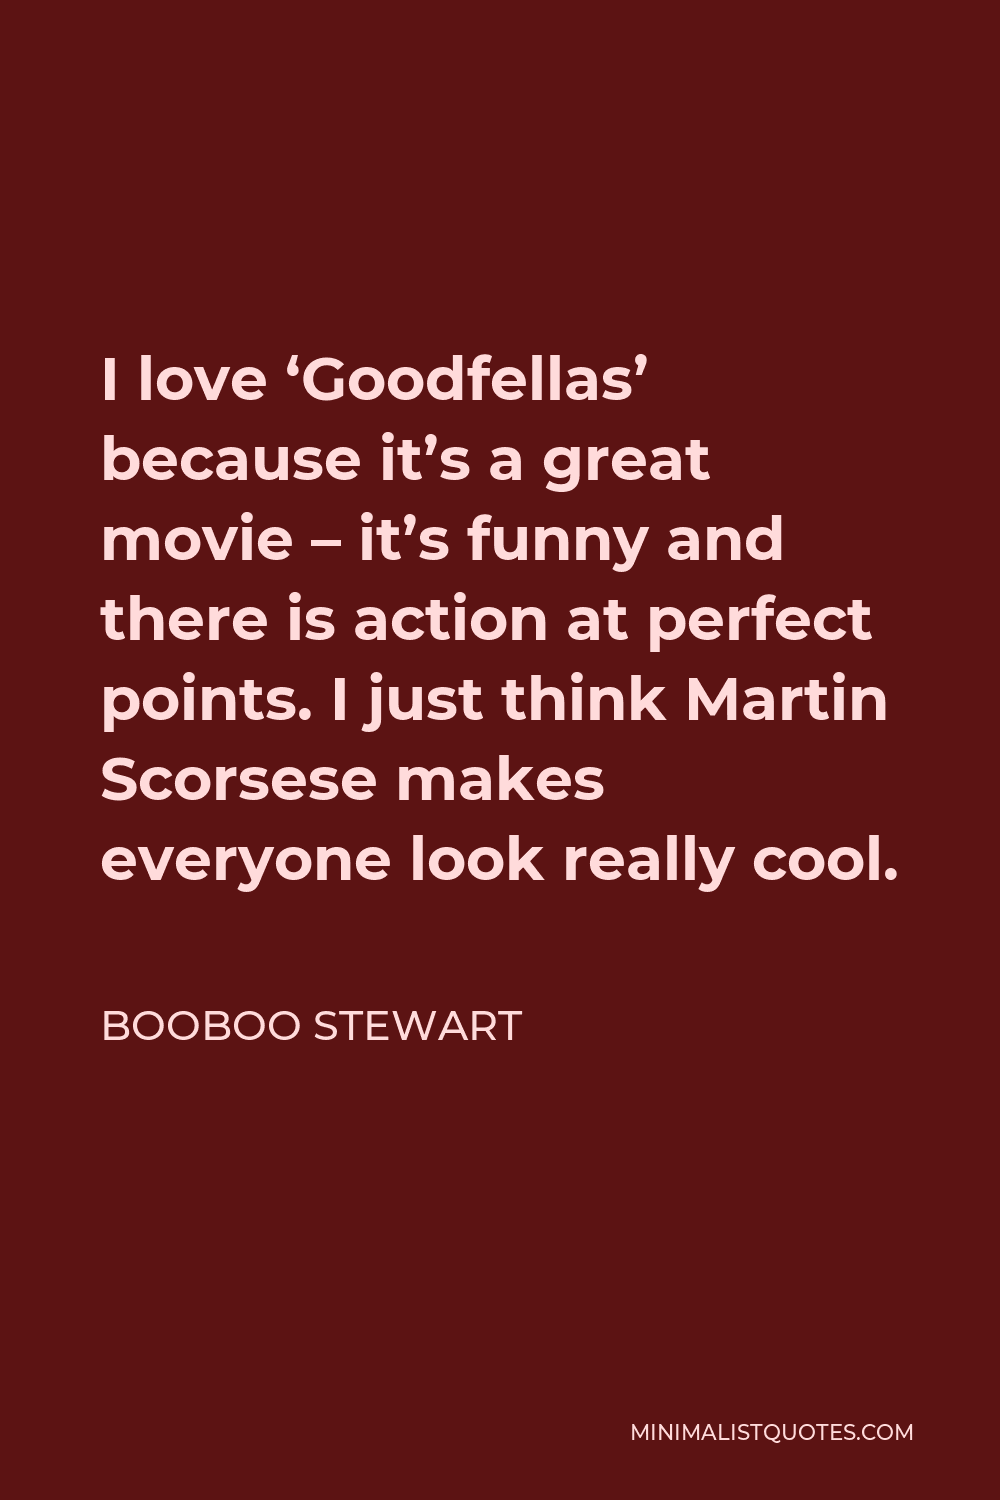 Booboo Stewart Quote: I love 'Goodfellas' because it's a great movie - it's  funny and there is action at perfect points. I just think Martin Scorsese  makes everyone look really cool.